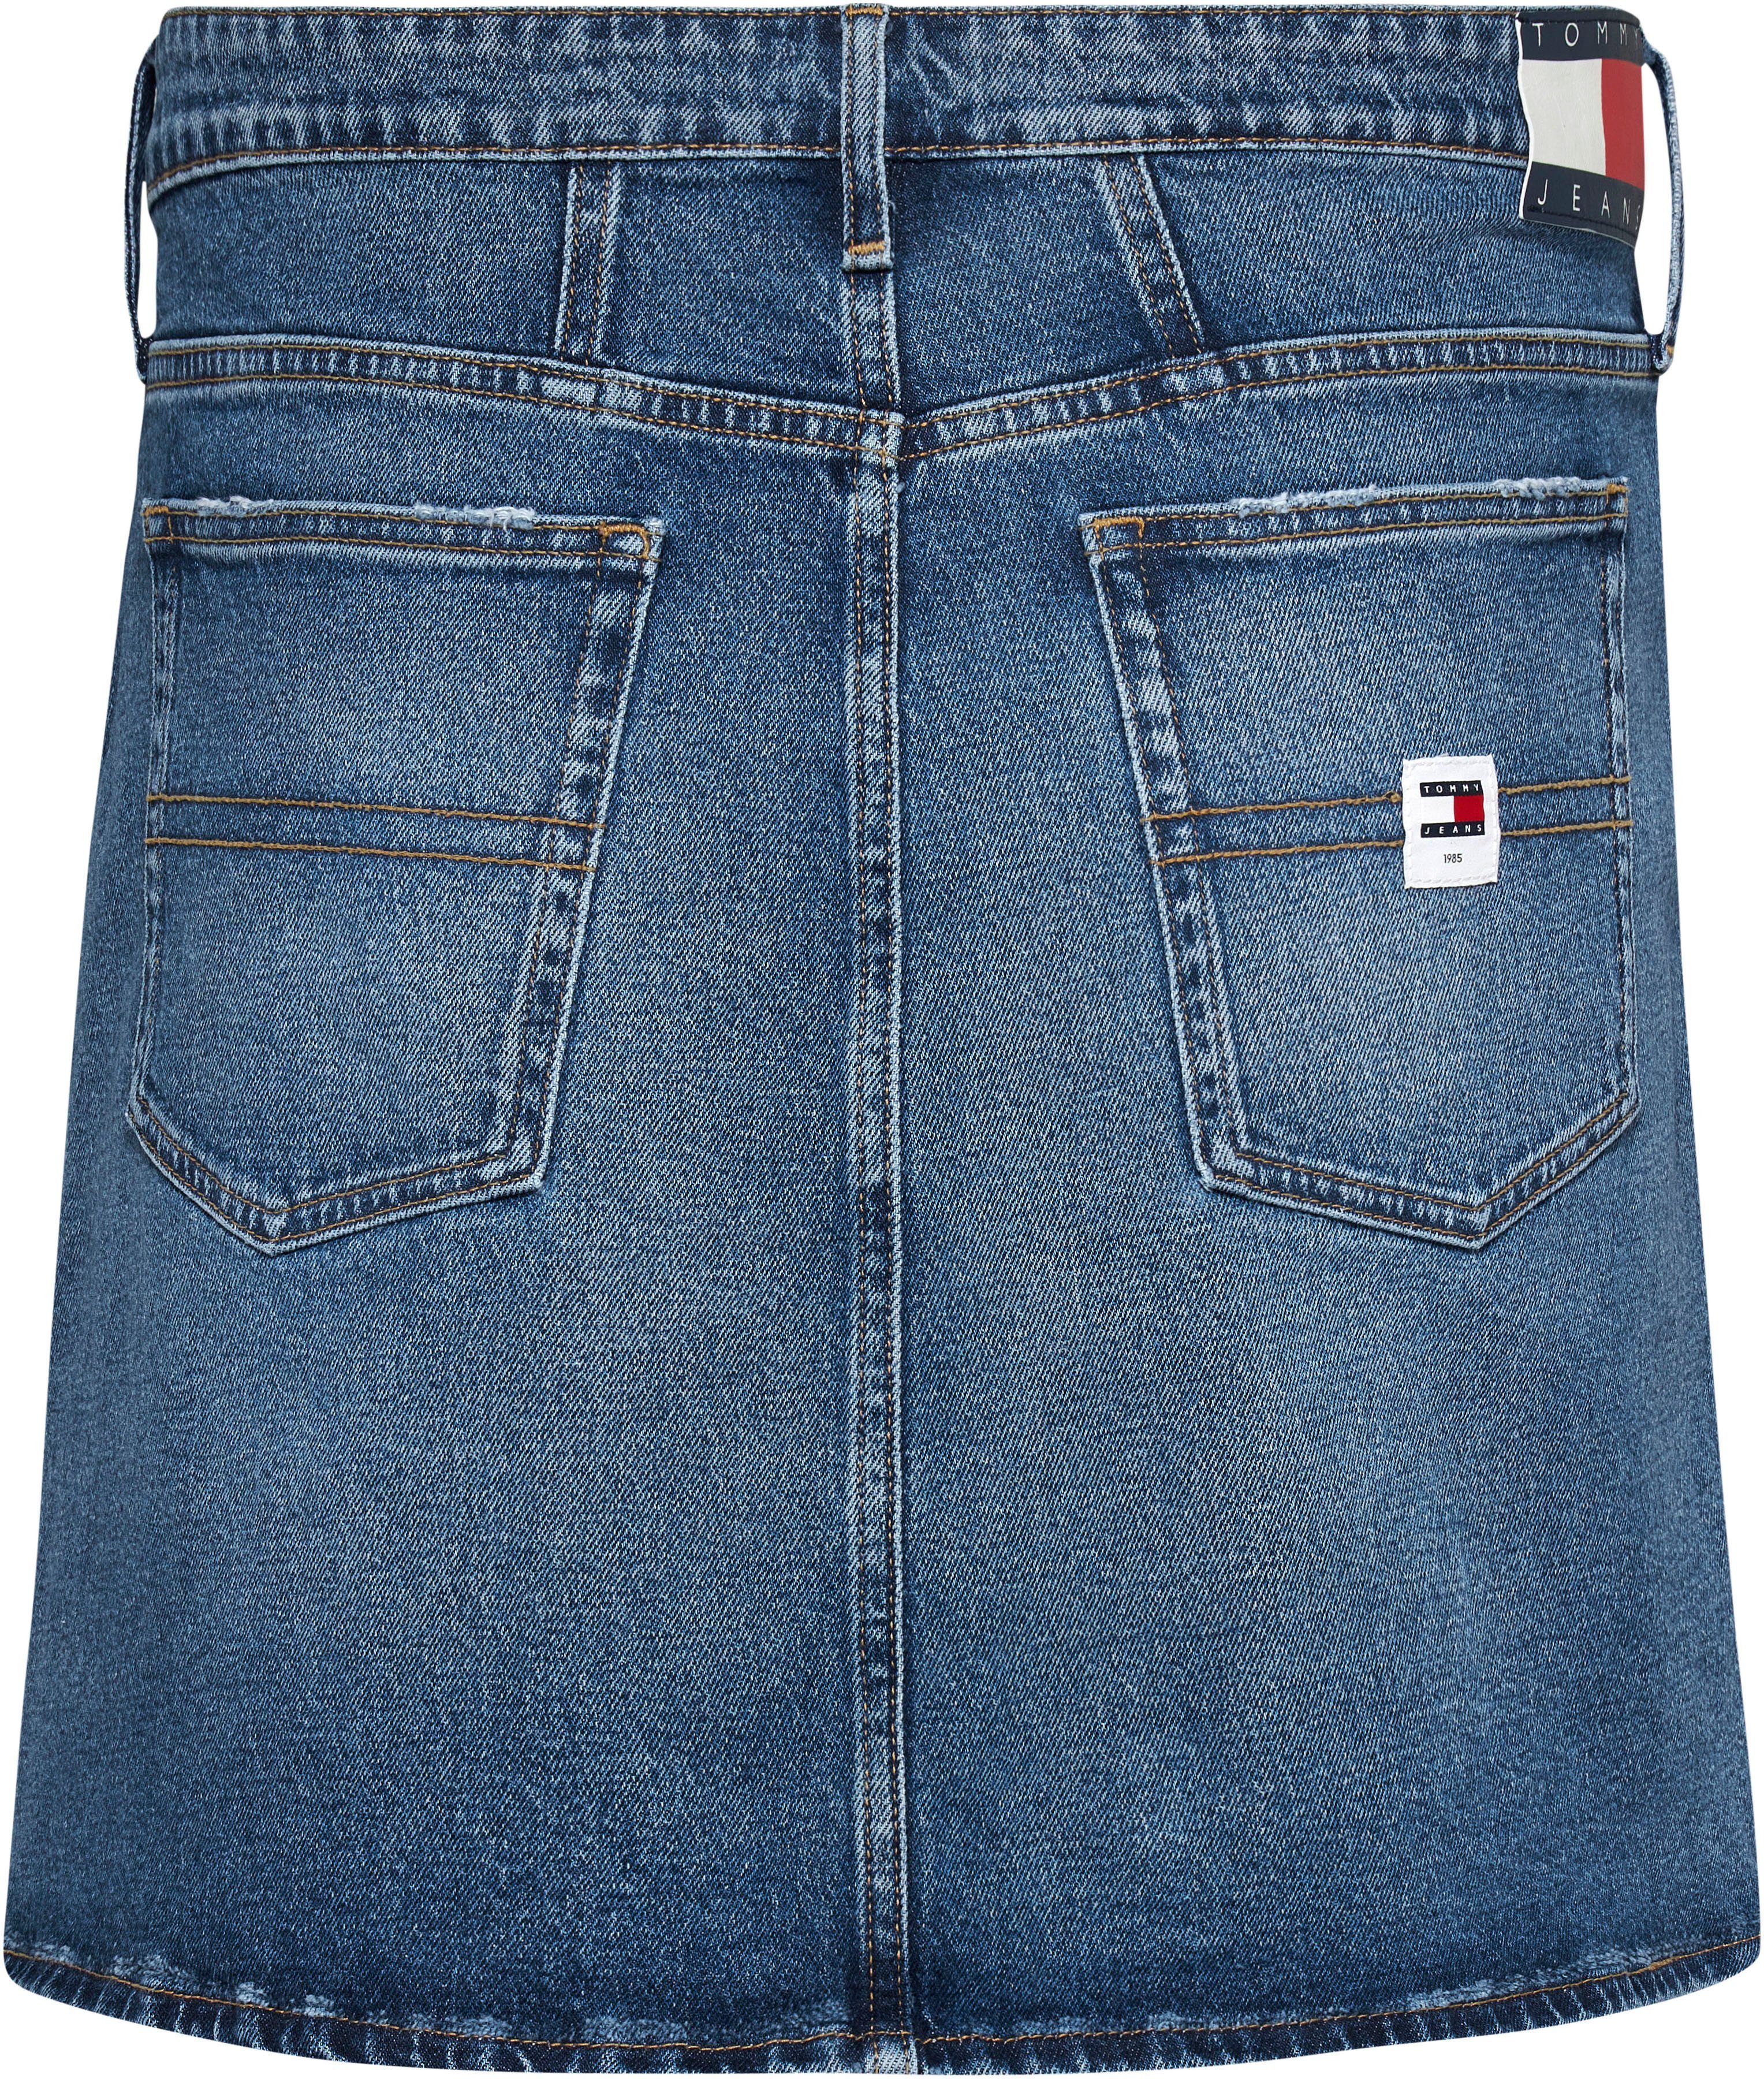 mit MOM Curve CRV Jeans Tommy UH AH6158 SKIRT Logostickerei Jeansrock